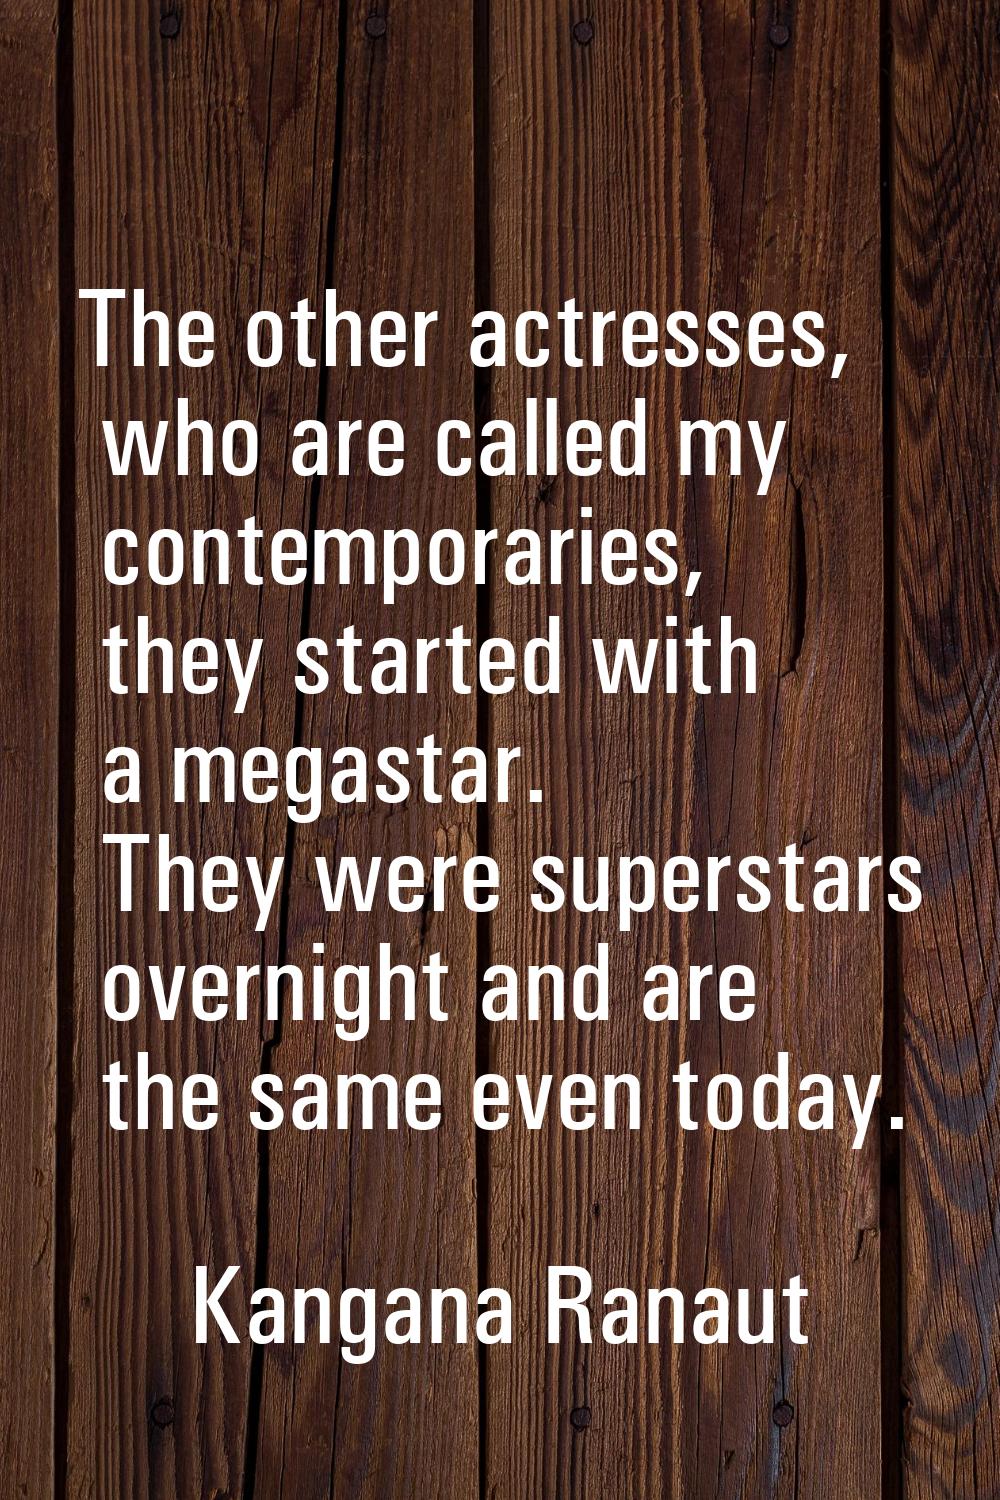 The other actresses, who are called my contemporaries, they started with a megastar. They were supe